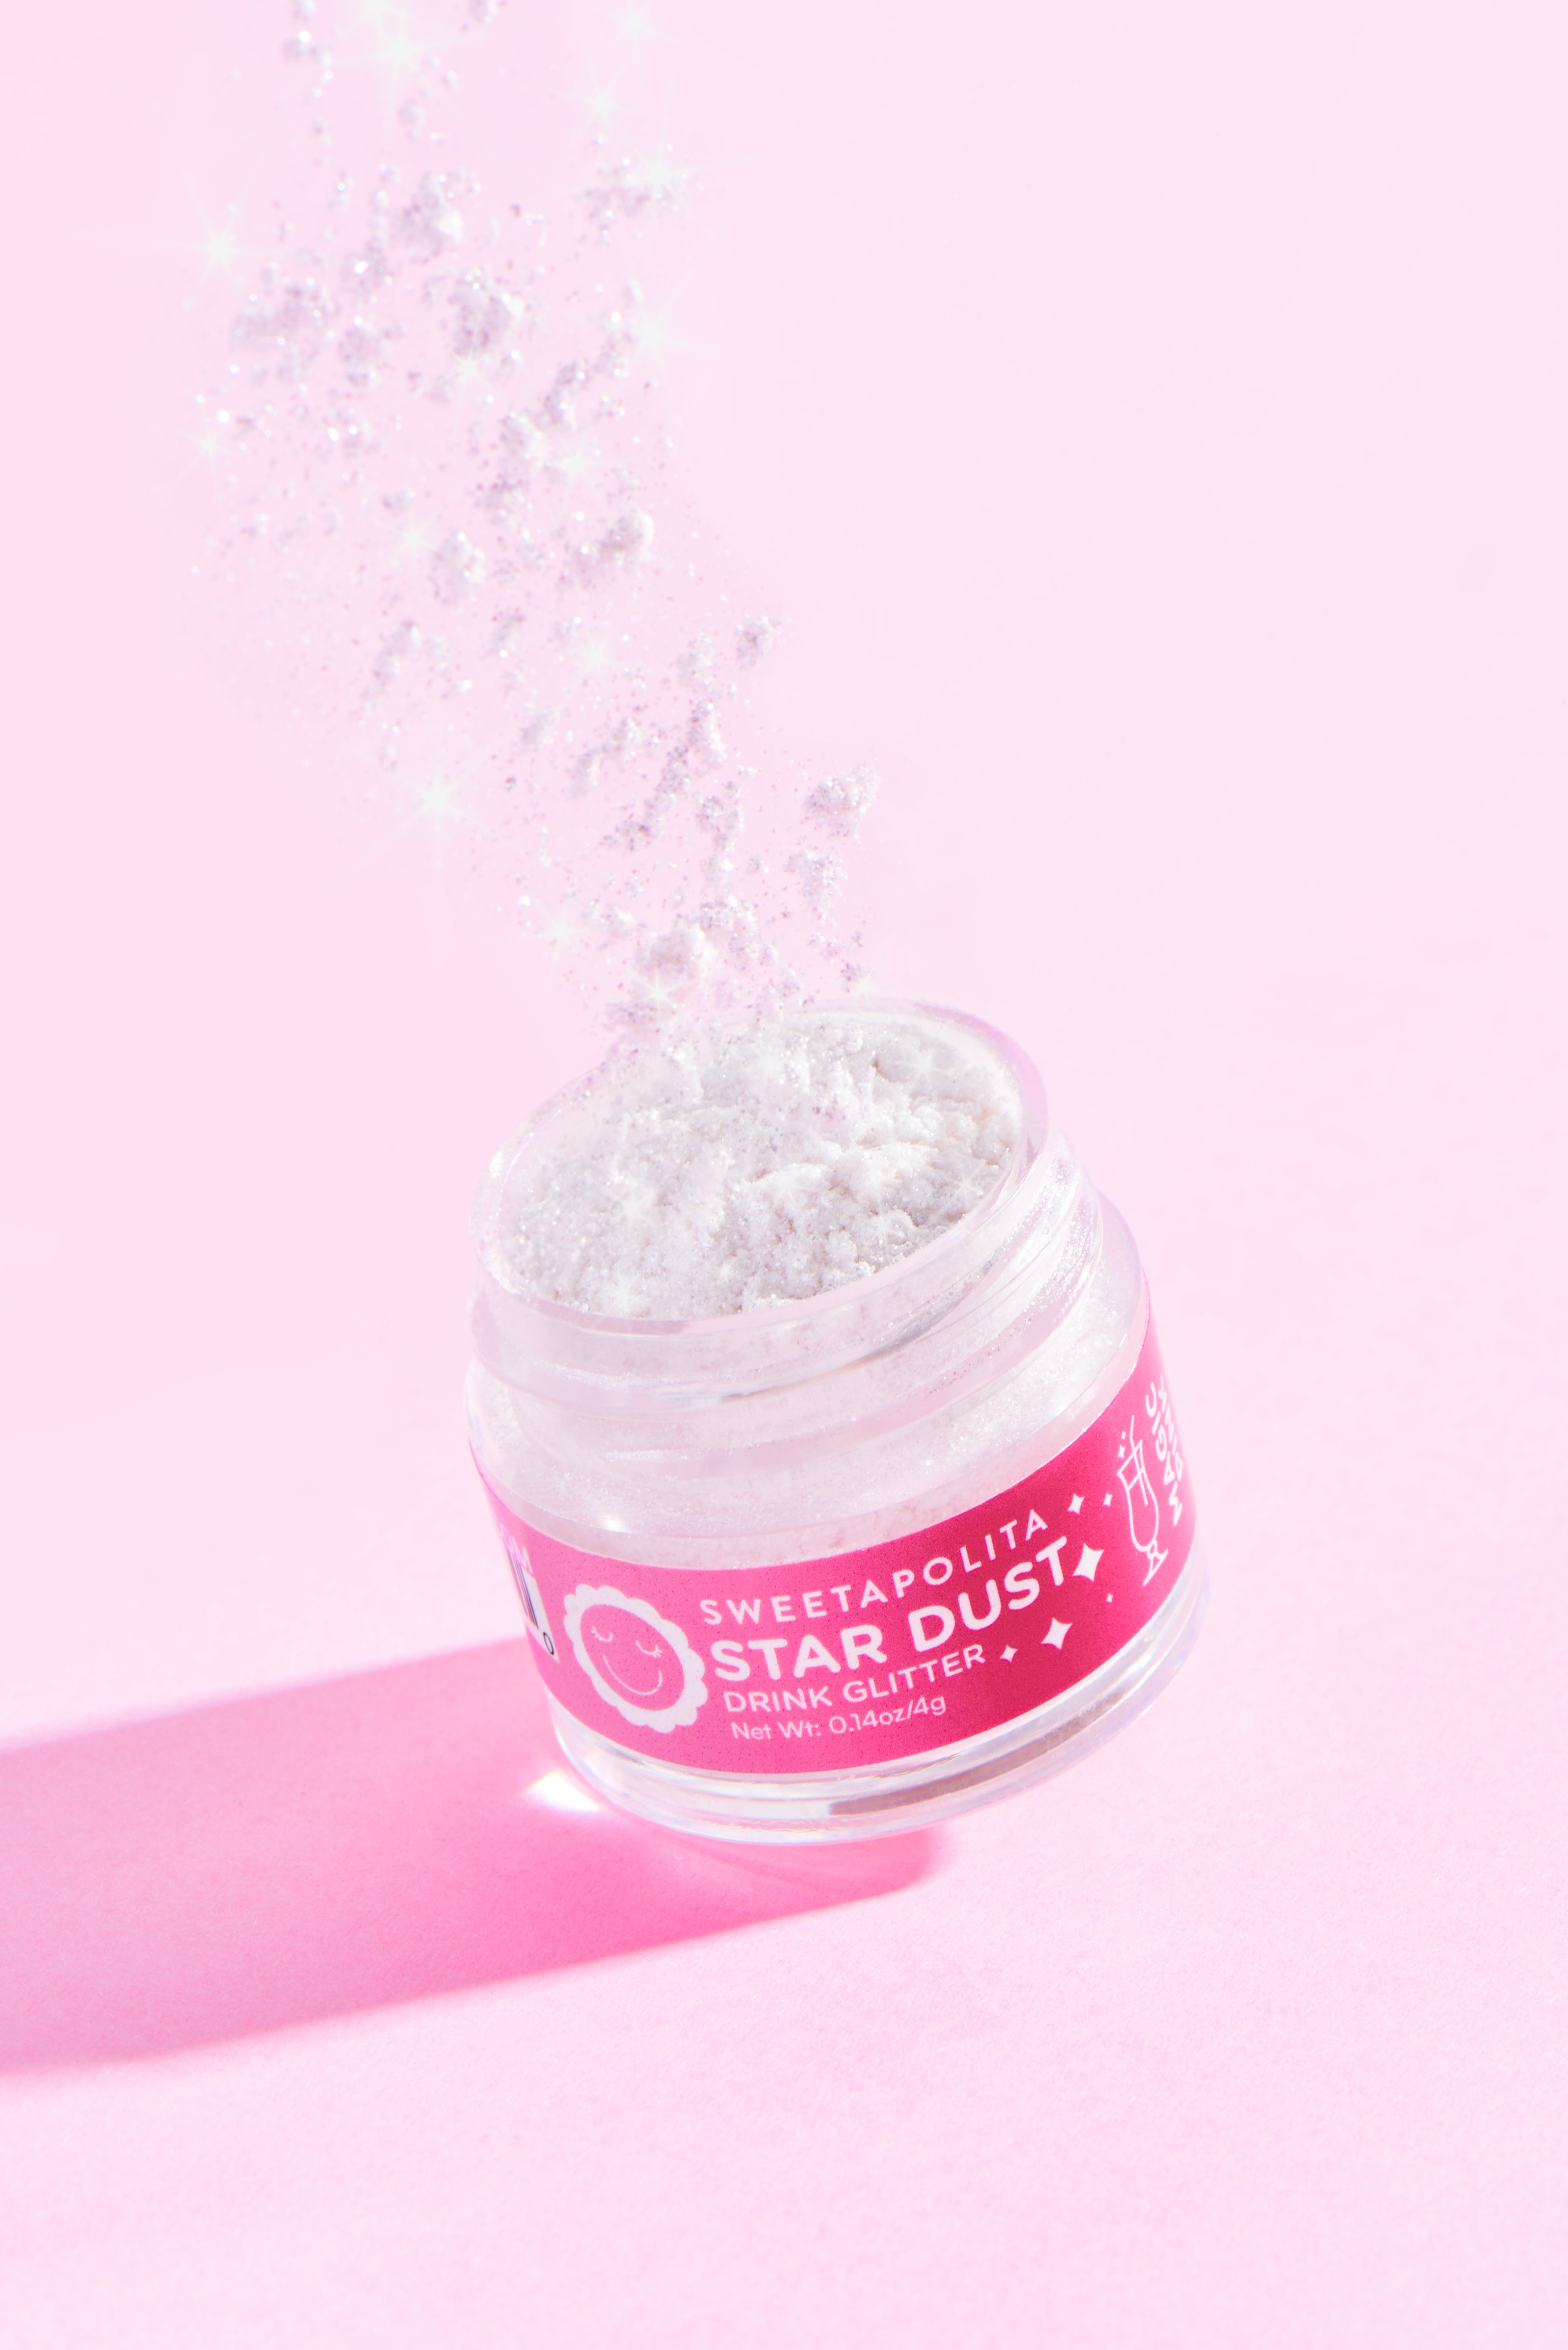 Magic Pink Colour Changing | Star Dust Edible Drink Glitter - US